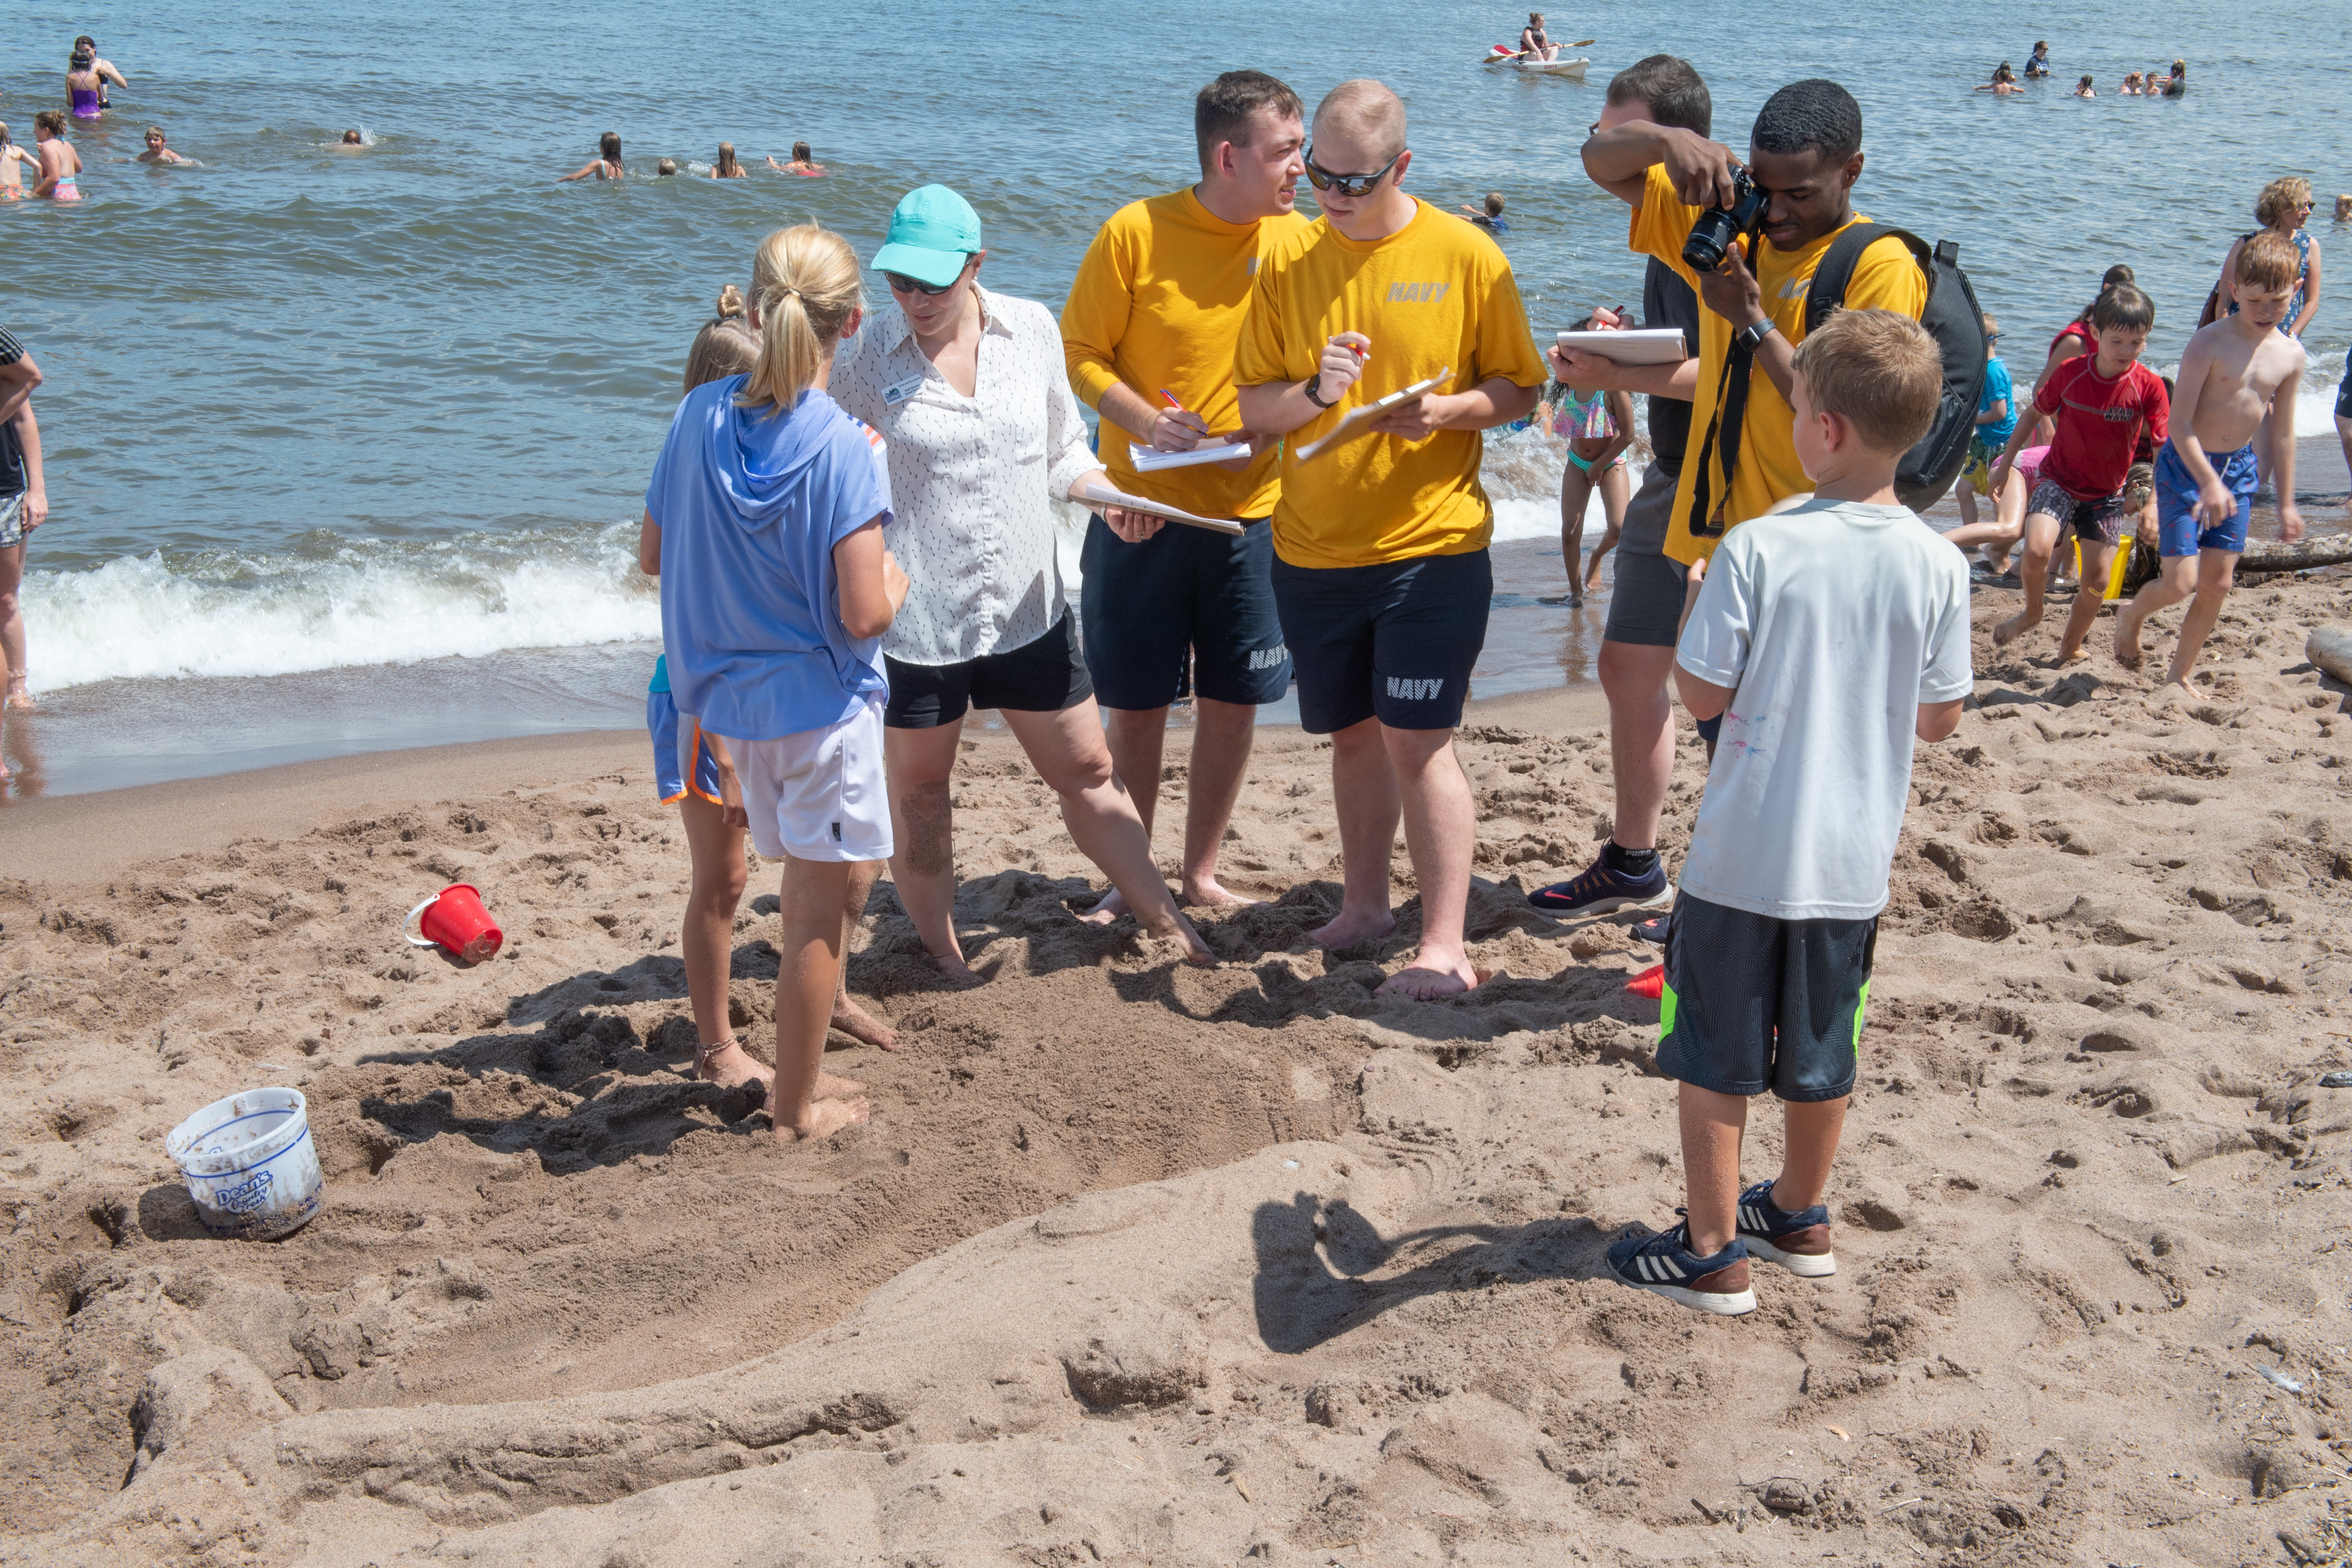 ailors assigned to Pre-Commissioning Unit (PCU) Minneapolis-Saint Paul (LCS 21) judge sand sculptures at the Park Point Sand Modeling Contest as part of Duluth Navy Week, July 18